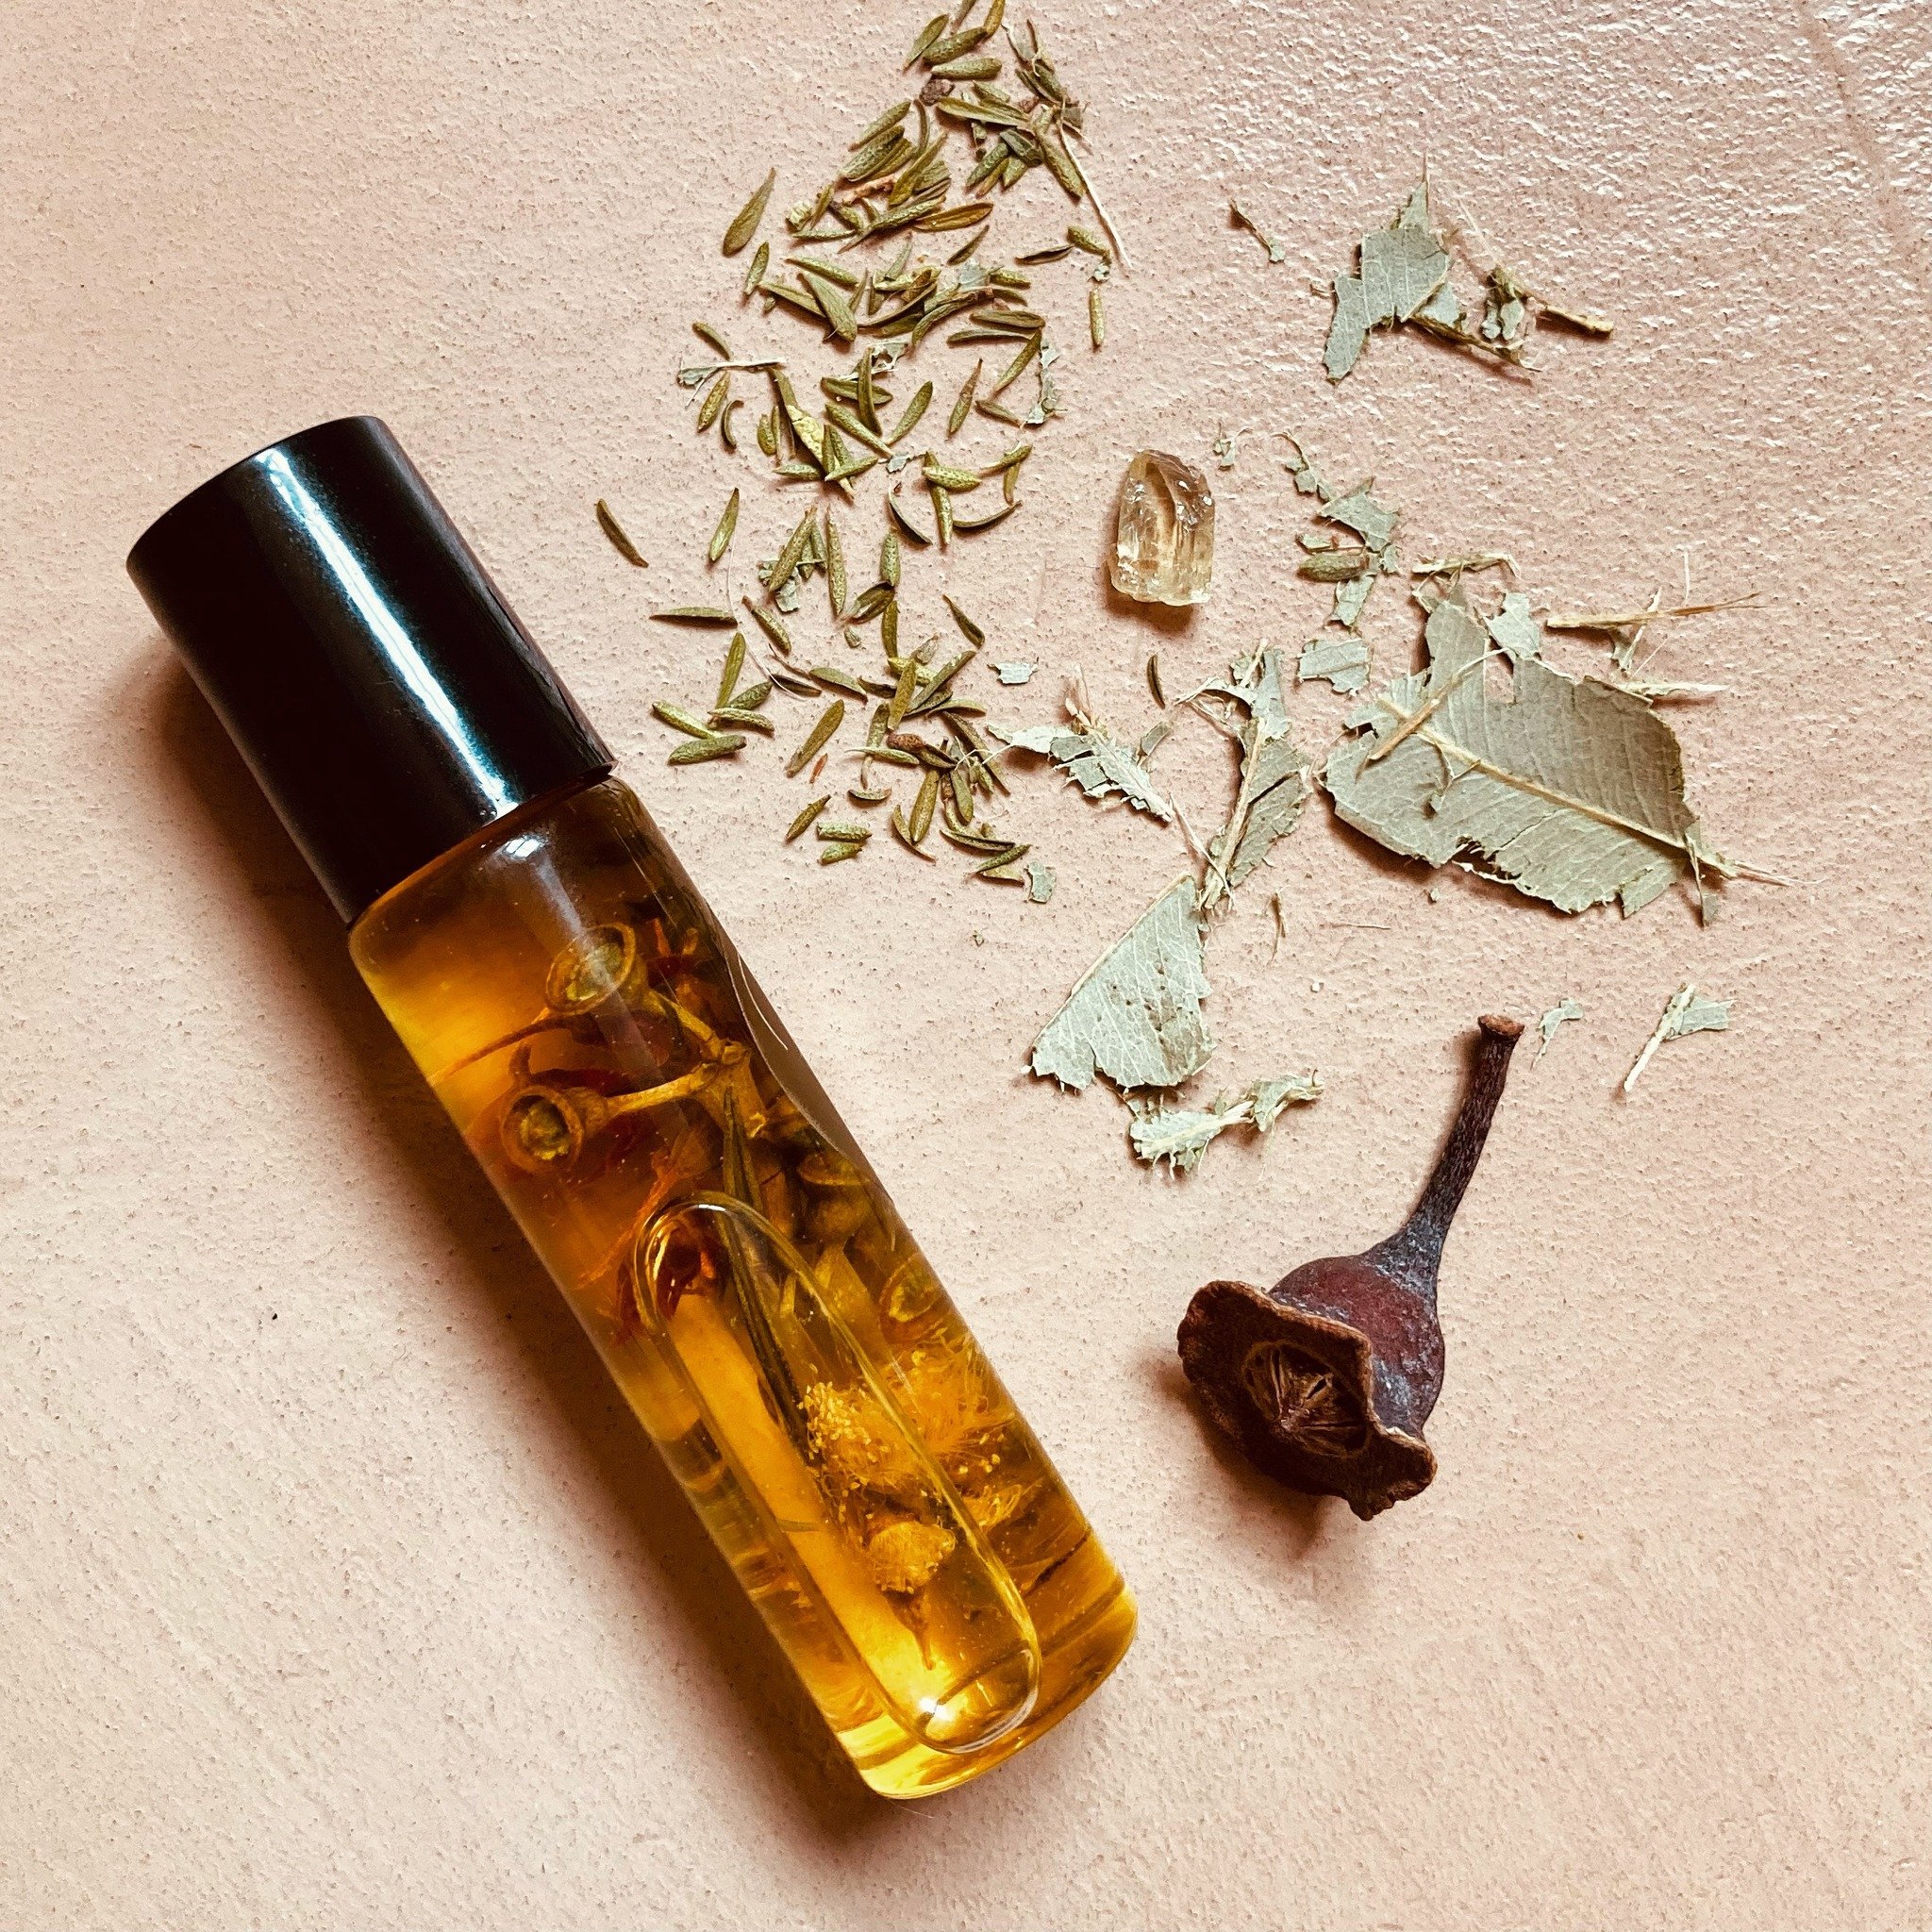 Radiance anointing oil is a special blend to my heart. 

Crafted with wildflowers from the pristine bushland around my mother&rsquo;s house in Sydney, this special composition features golden wattle, boronia and macrocarpa as well as kunzea, fragonia